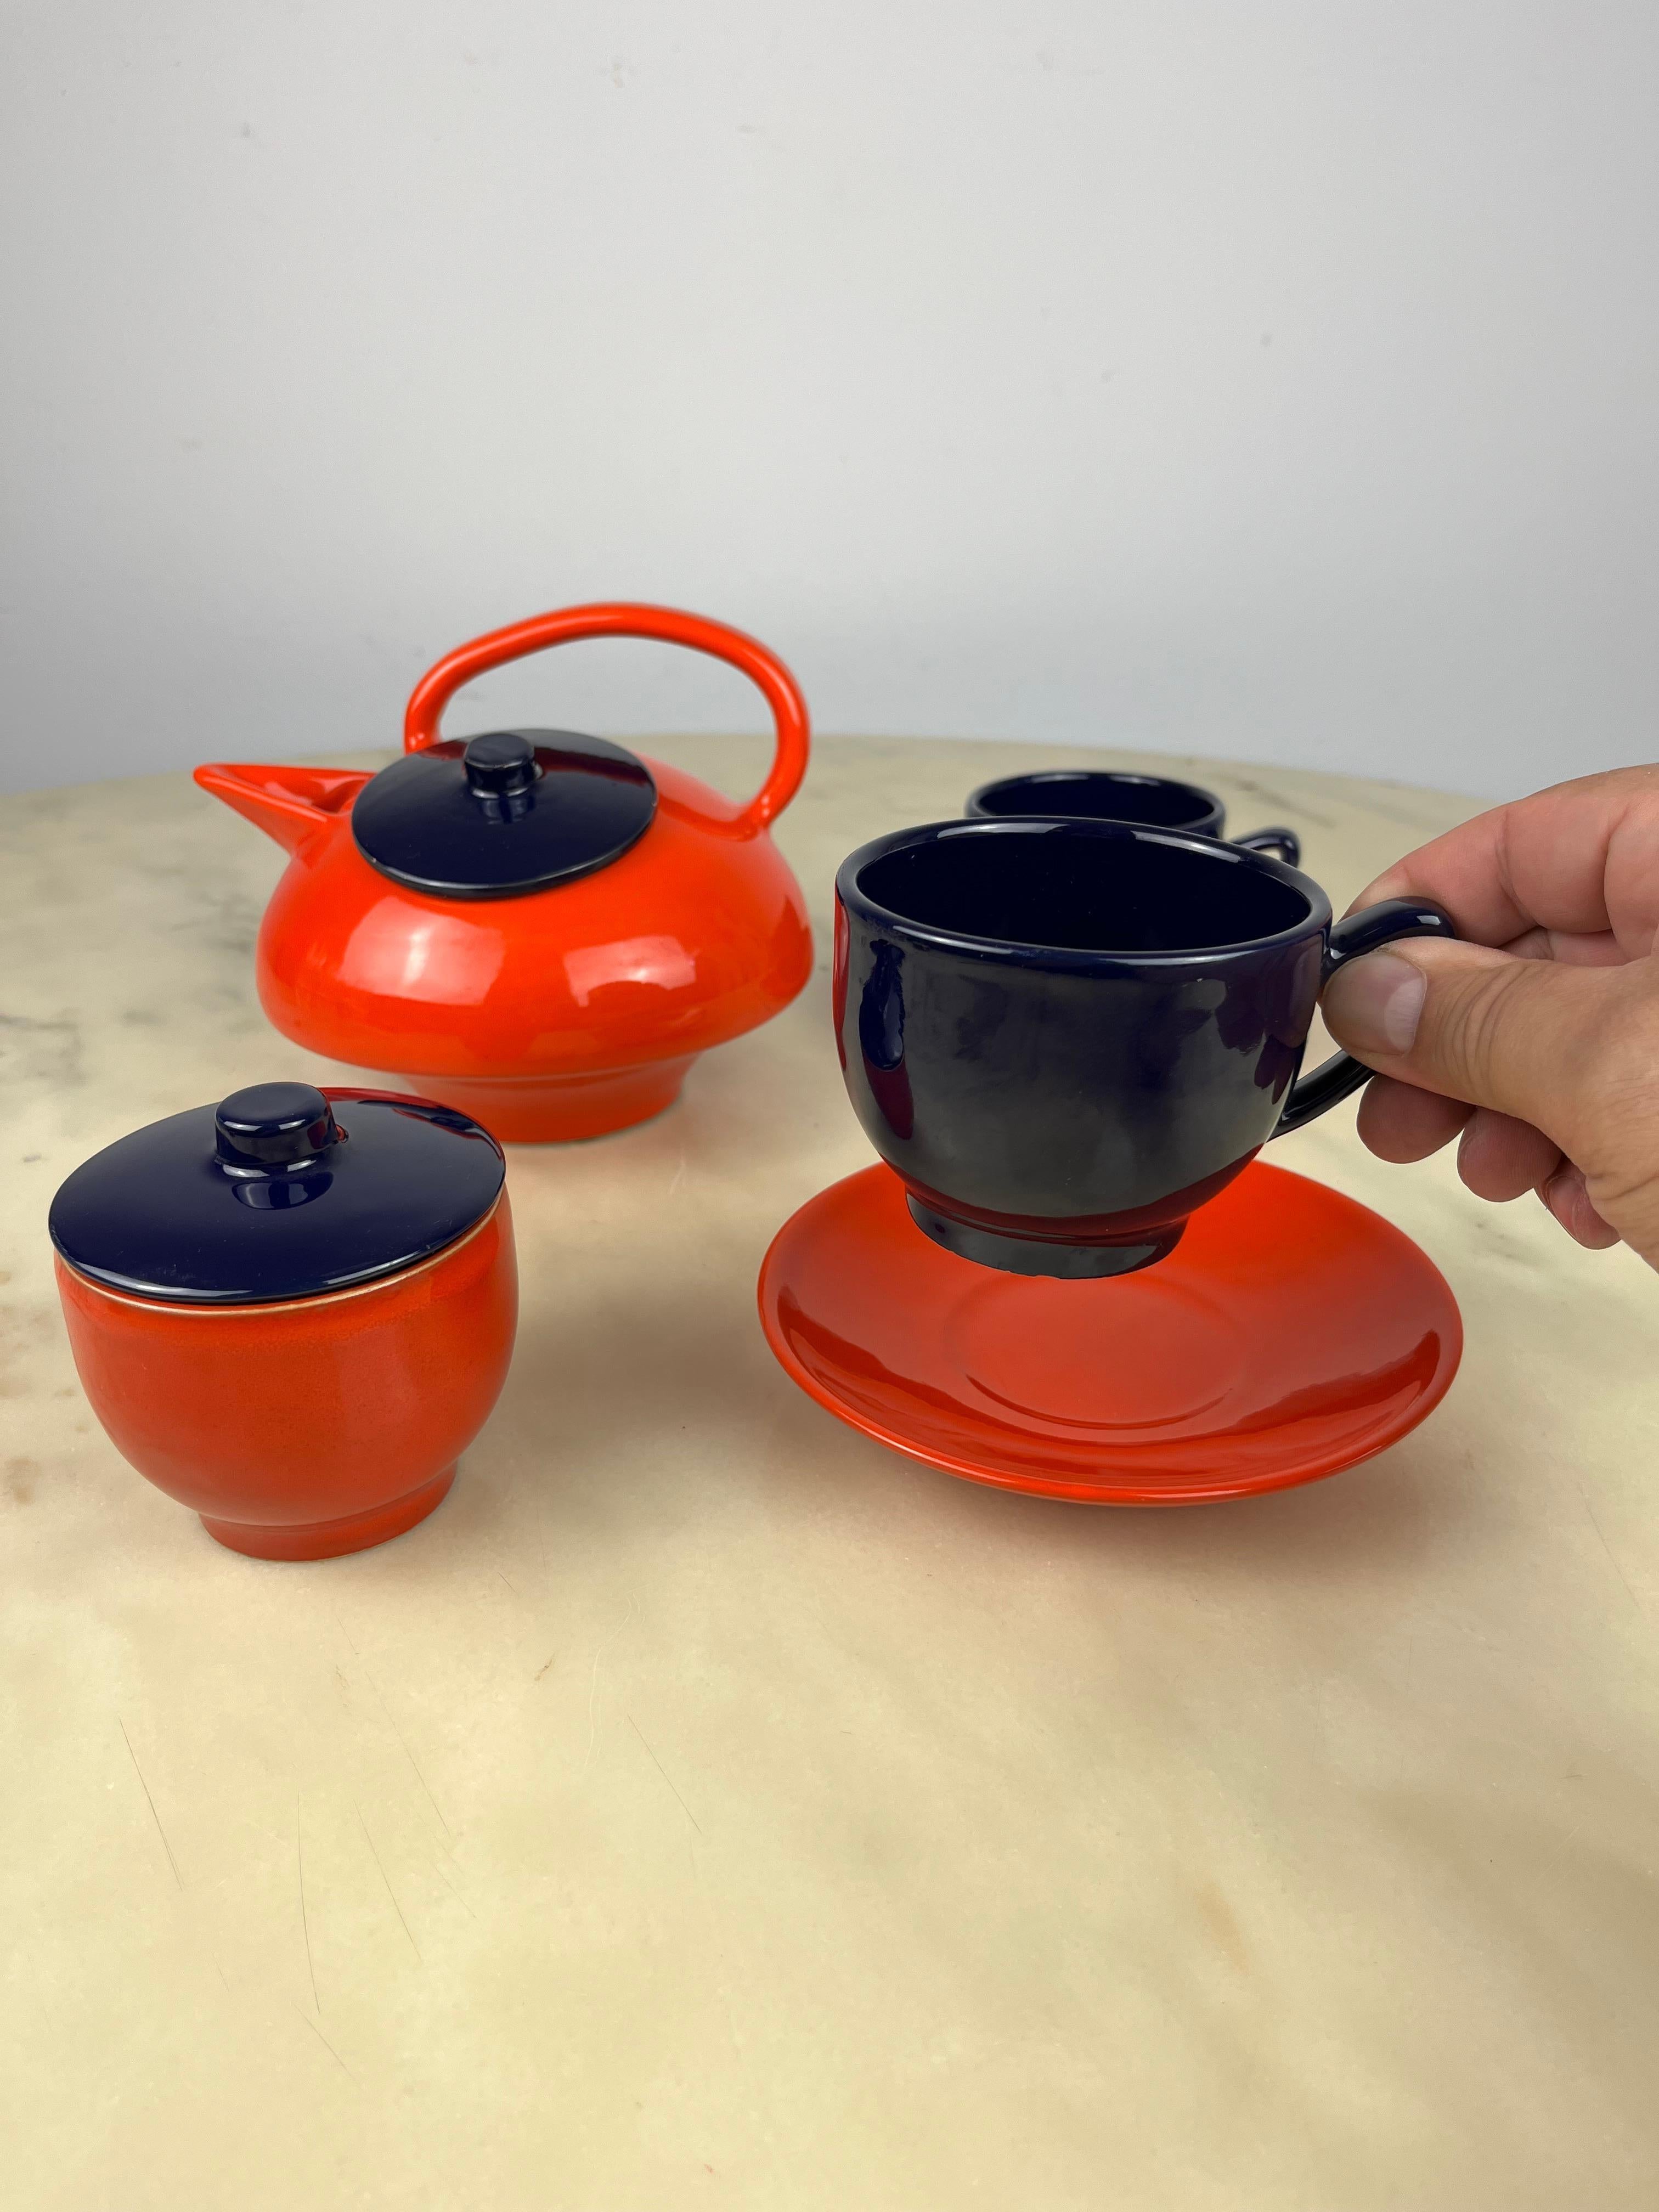 Vintage ceramic tea set, Italy, 1970s
It has always belonged to my grandparents and has never been used, two-tone, and is made up of a teapot measuring 18 cm x 16 cm high, a sugar bowl measuring 9 cm x 9 cm, two cups measuring 8.5 cm x 7 cm high,